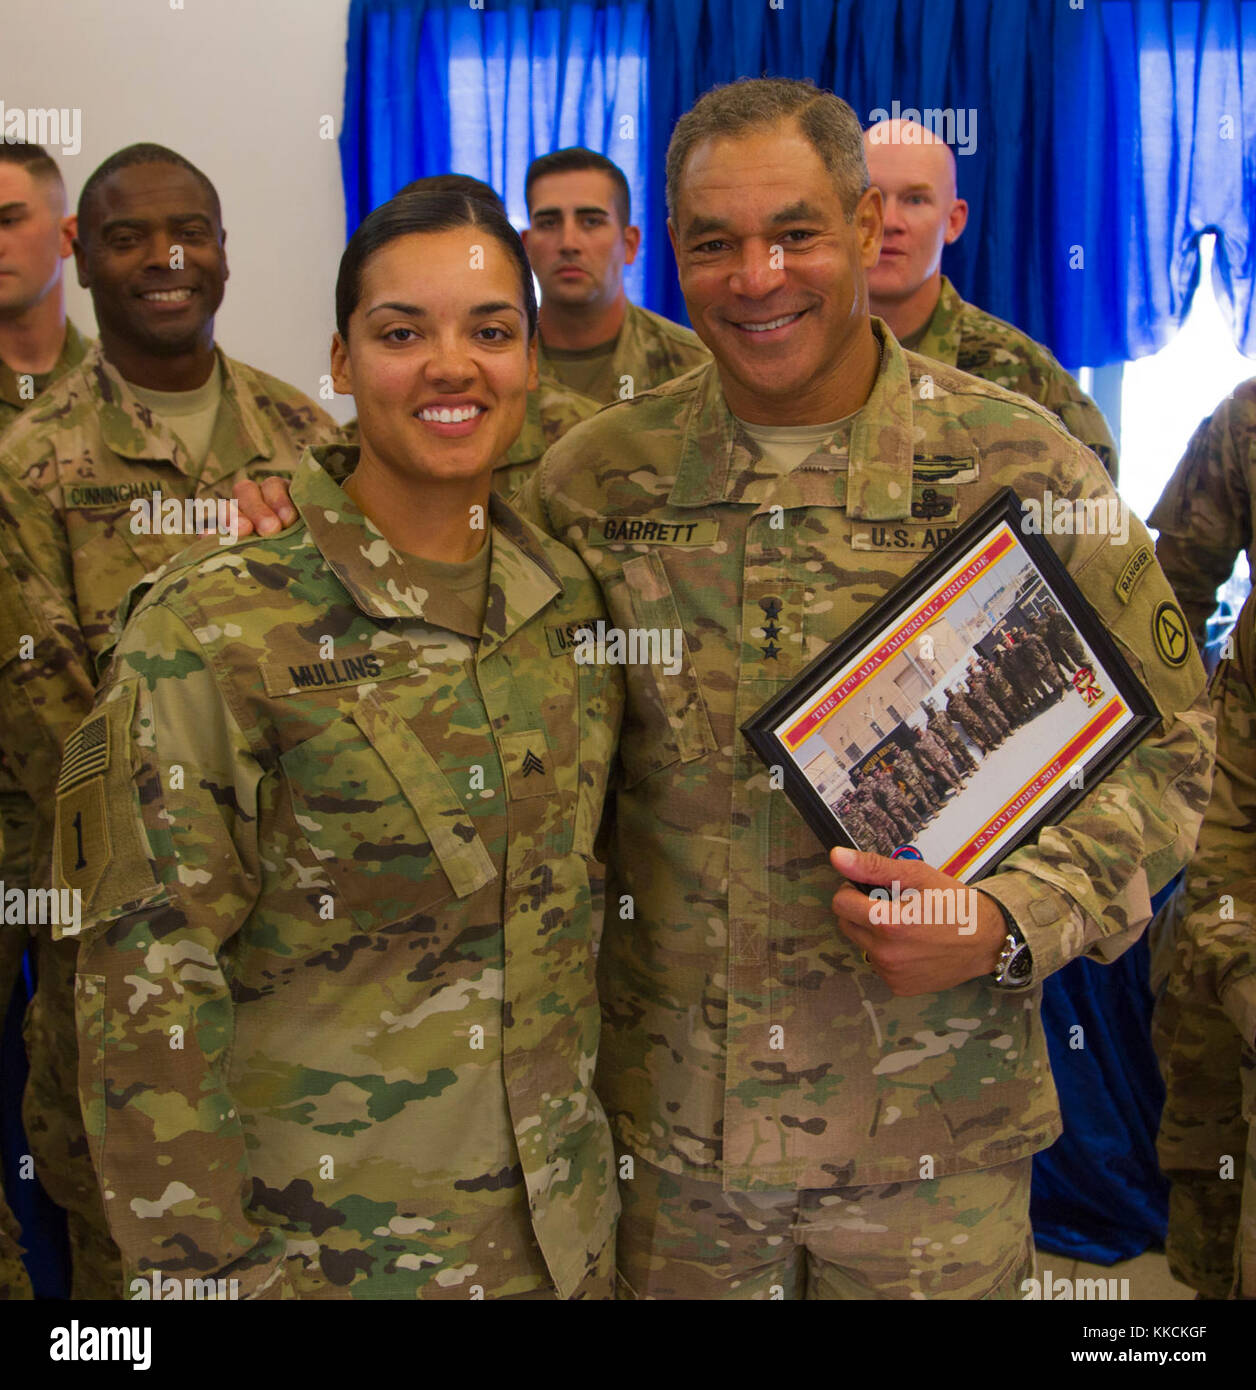 Soldiers from the 11th Air Defense Artillery Brigade and 2nd Battalion, 43rd Air Defense Artillery Regiment present Lt. Gen. Michael Garrett, Commanding General of U.S. Army Central, with a unit photo as a gift following his visit to Al Udeid Air Base in Qatar on Nov. 18. The intent of Garrett’s visit to AUAB was to discuss the mission, tasks, and purpose with Soldiers and officers stationed at the base. (U.S. photo taken by Spc. Joshua P. Morris, U.S. ARCENT PAO) Stock Photo